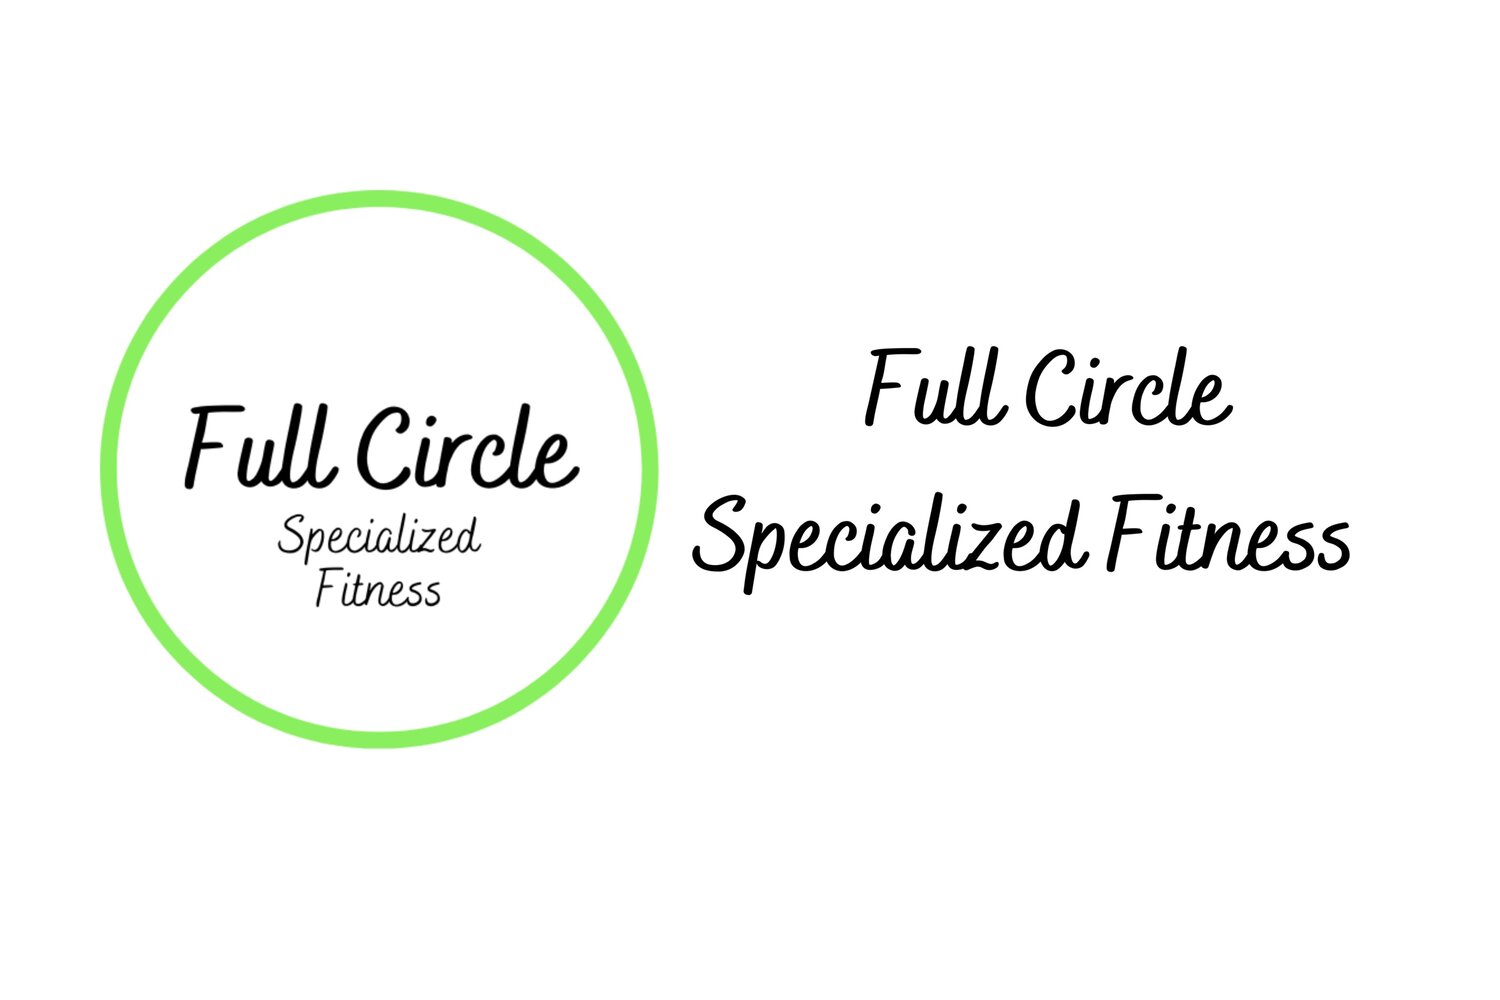 Full Circle Specialized Fitness